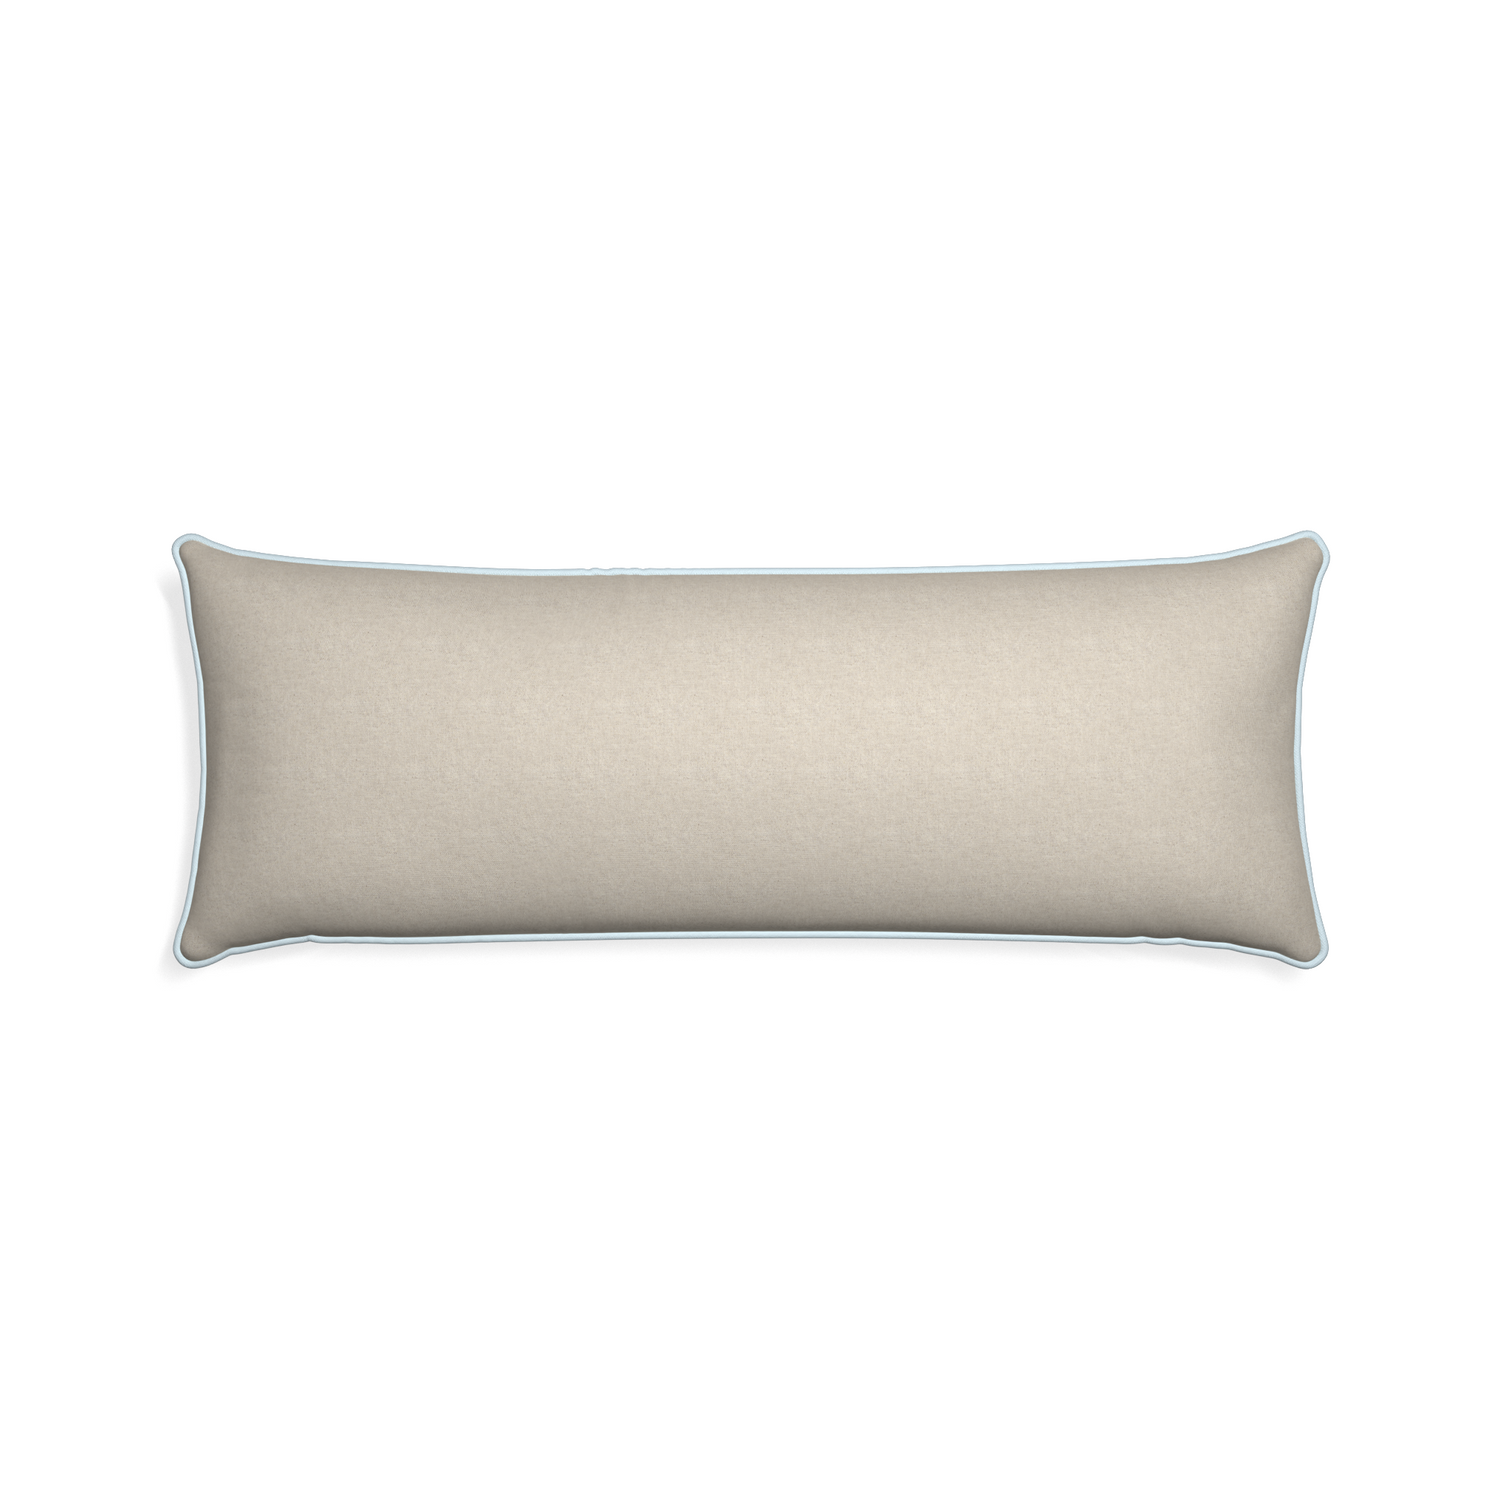 Xl-lumbar oat custom pillow with powder piping on white background